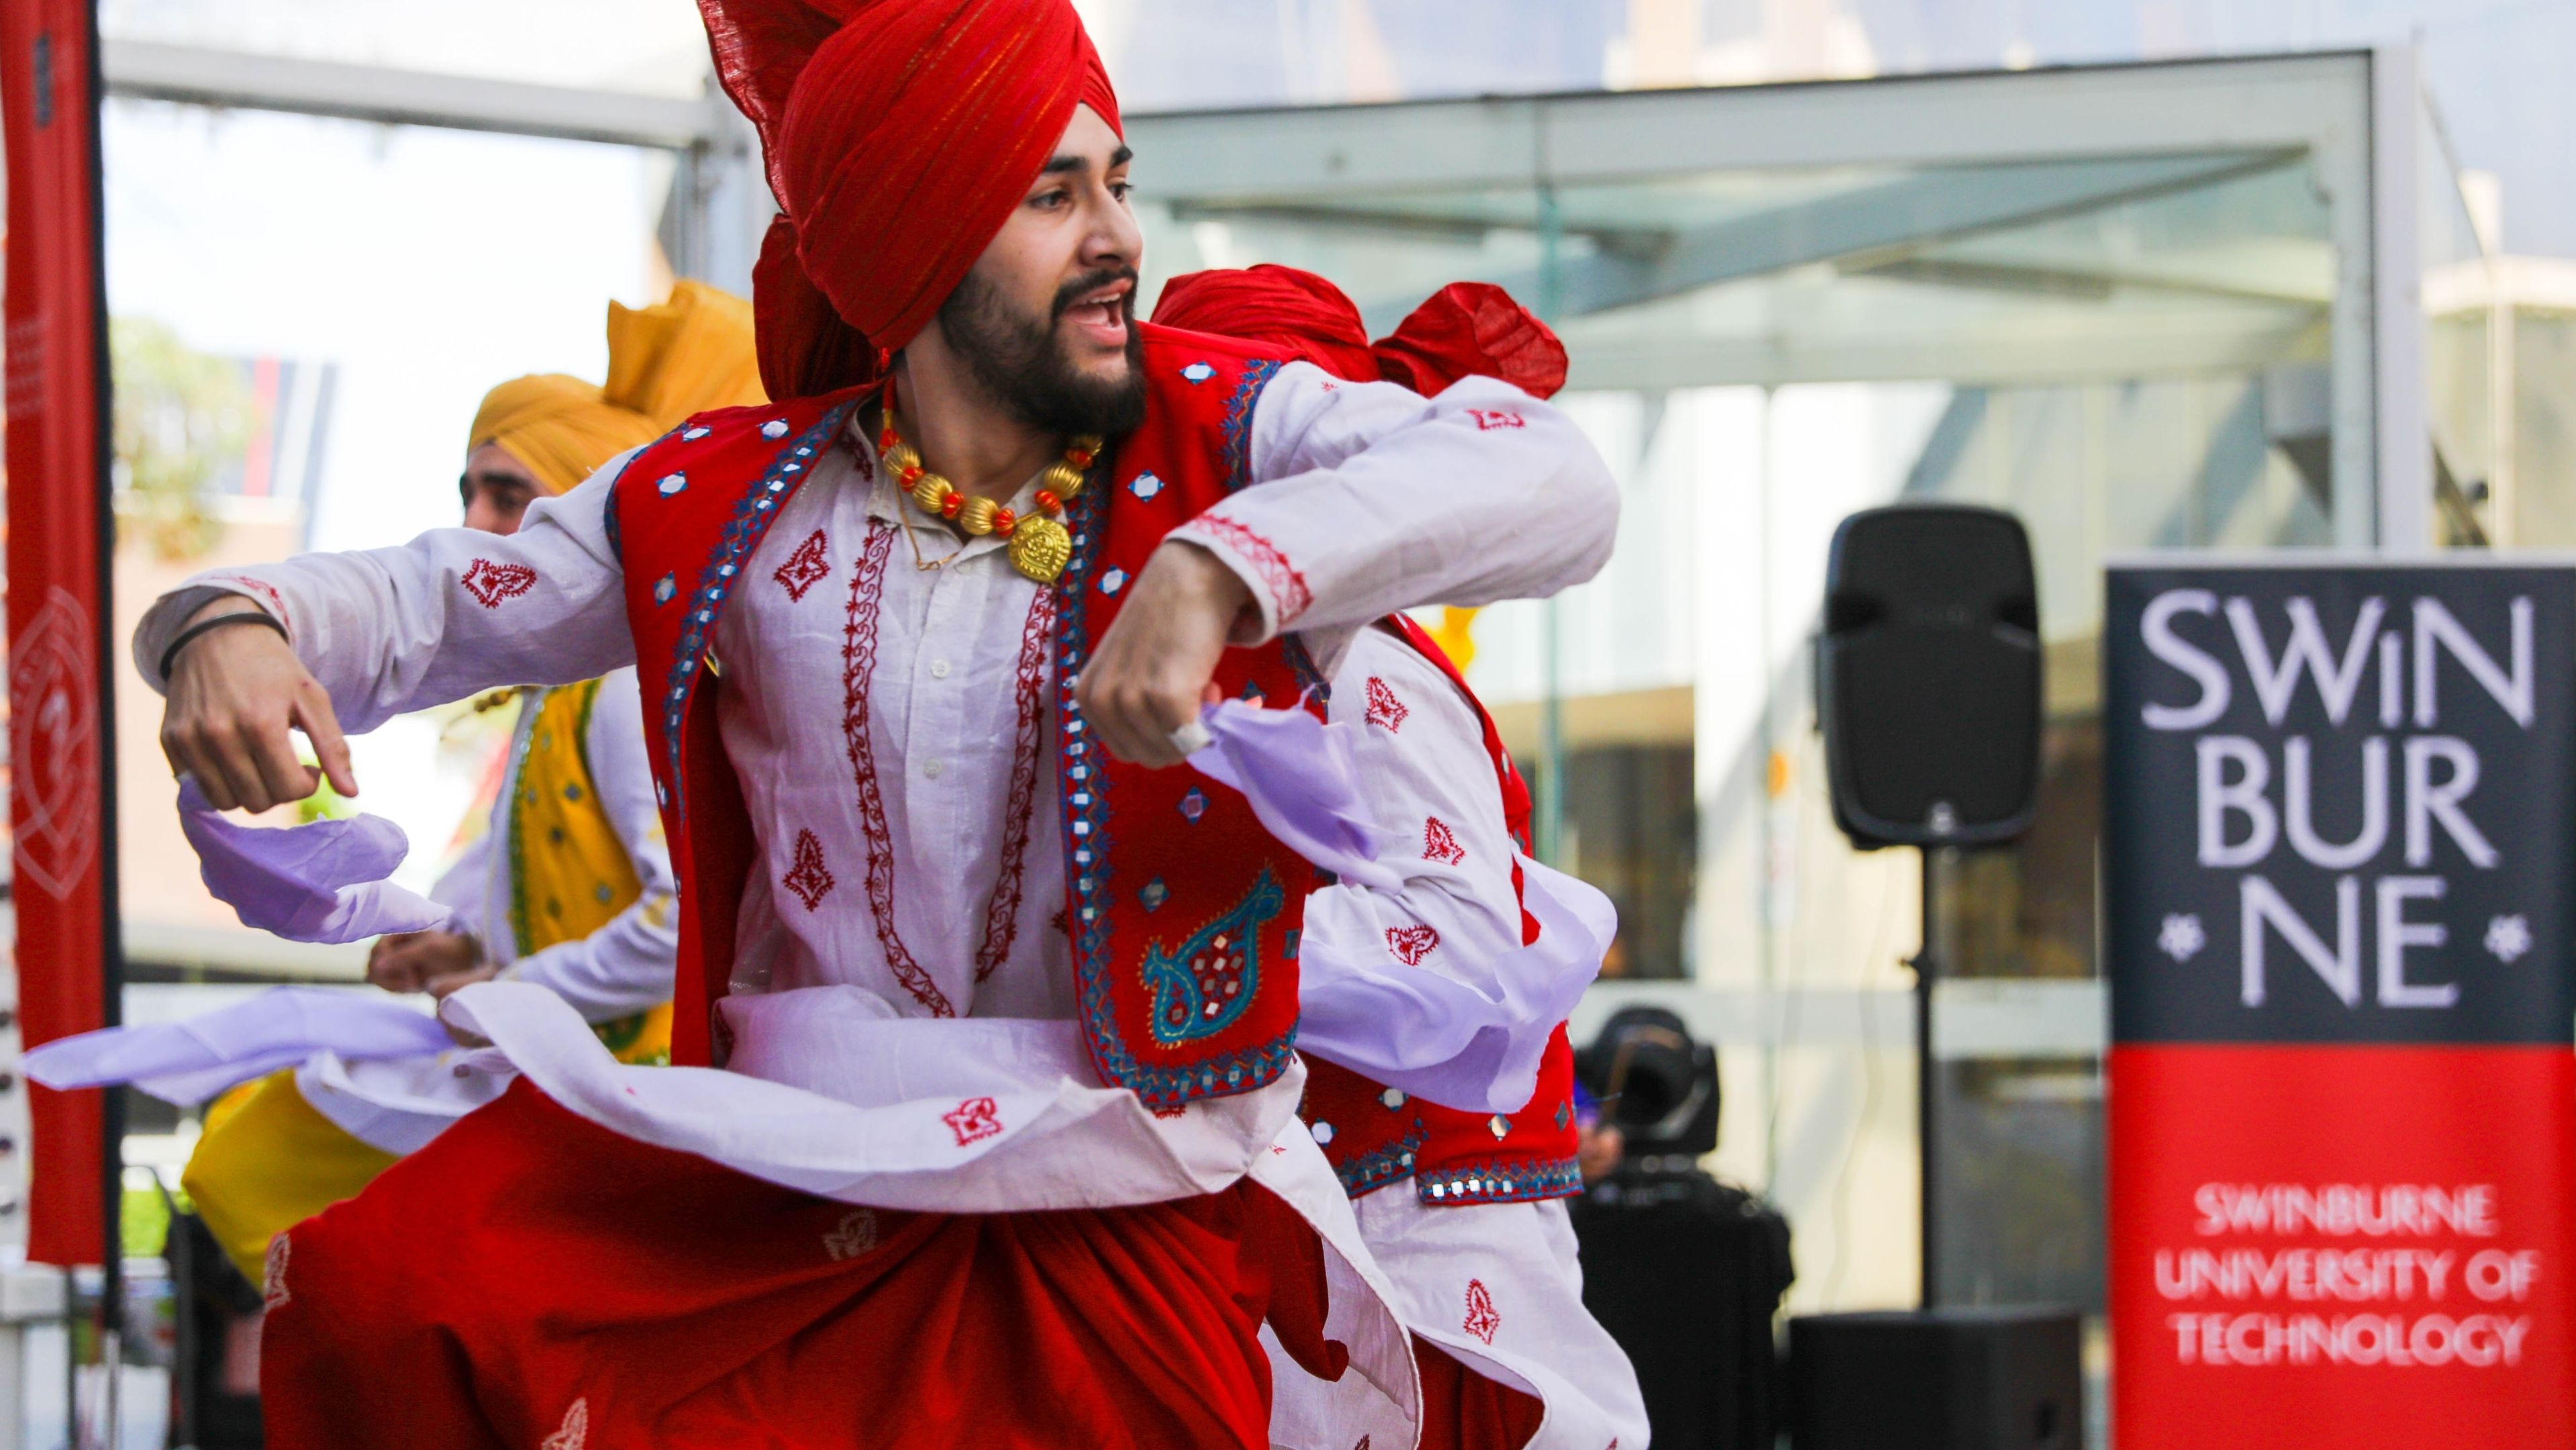 Man wearing bright red traditional Diawli attire dances upon a Swinburne stage